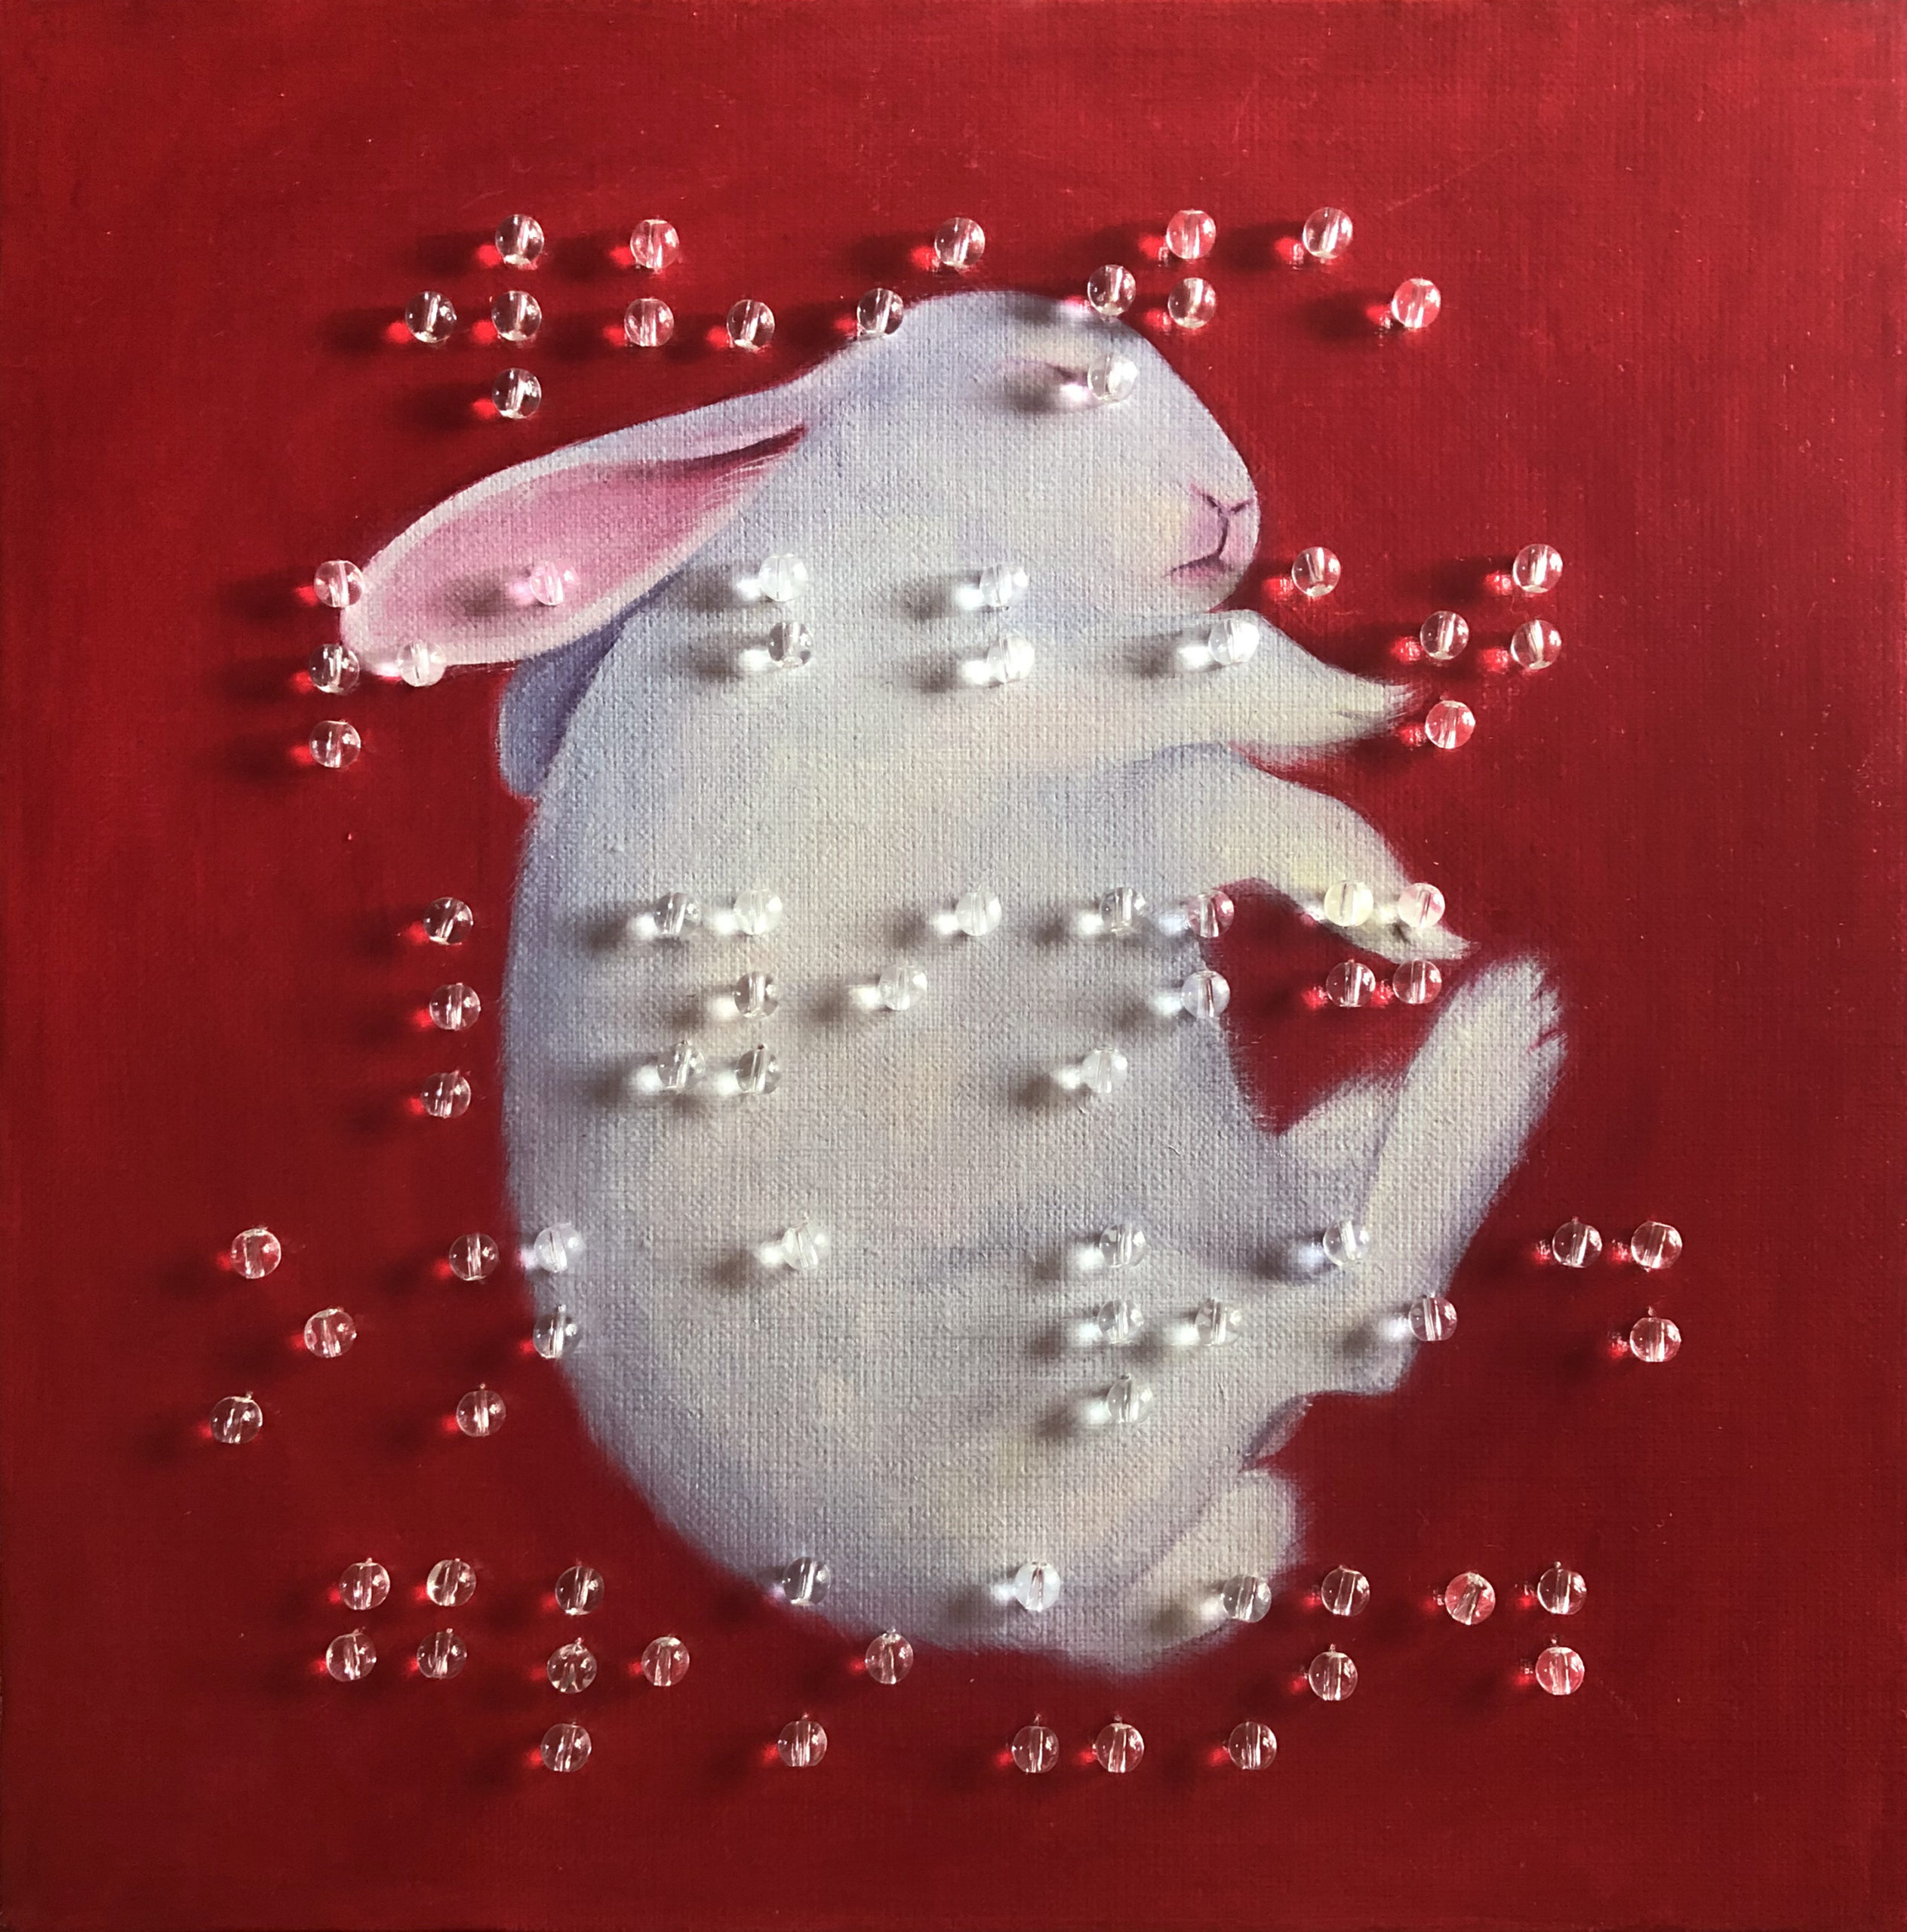 WHITE RABBIT LYING ON A RED GROUND